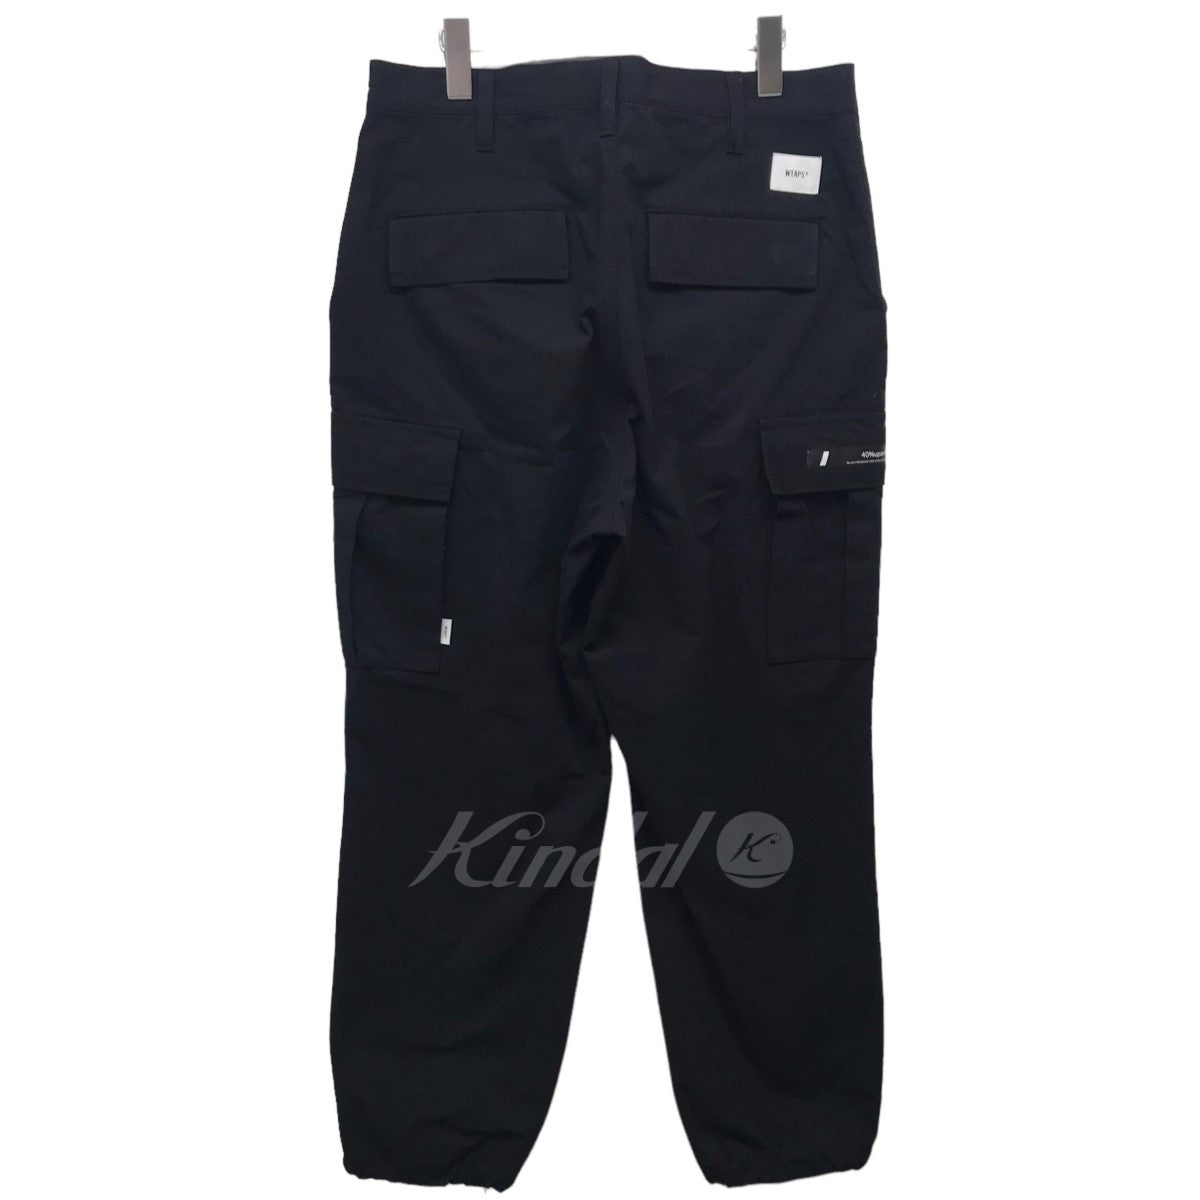 WTAPS(ダブルタップス) 23SS「Milt9601 Trousers Nyco． Ripstop 